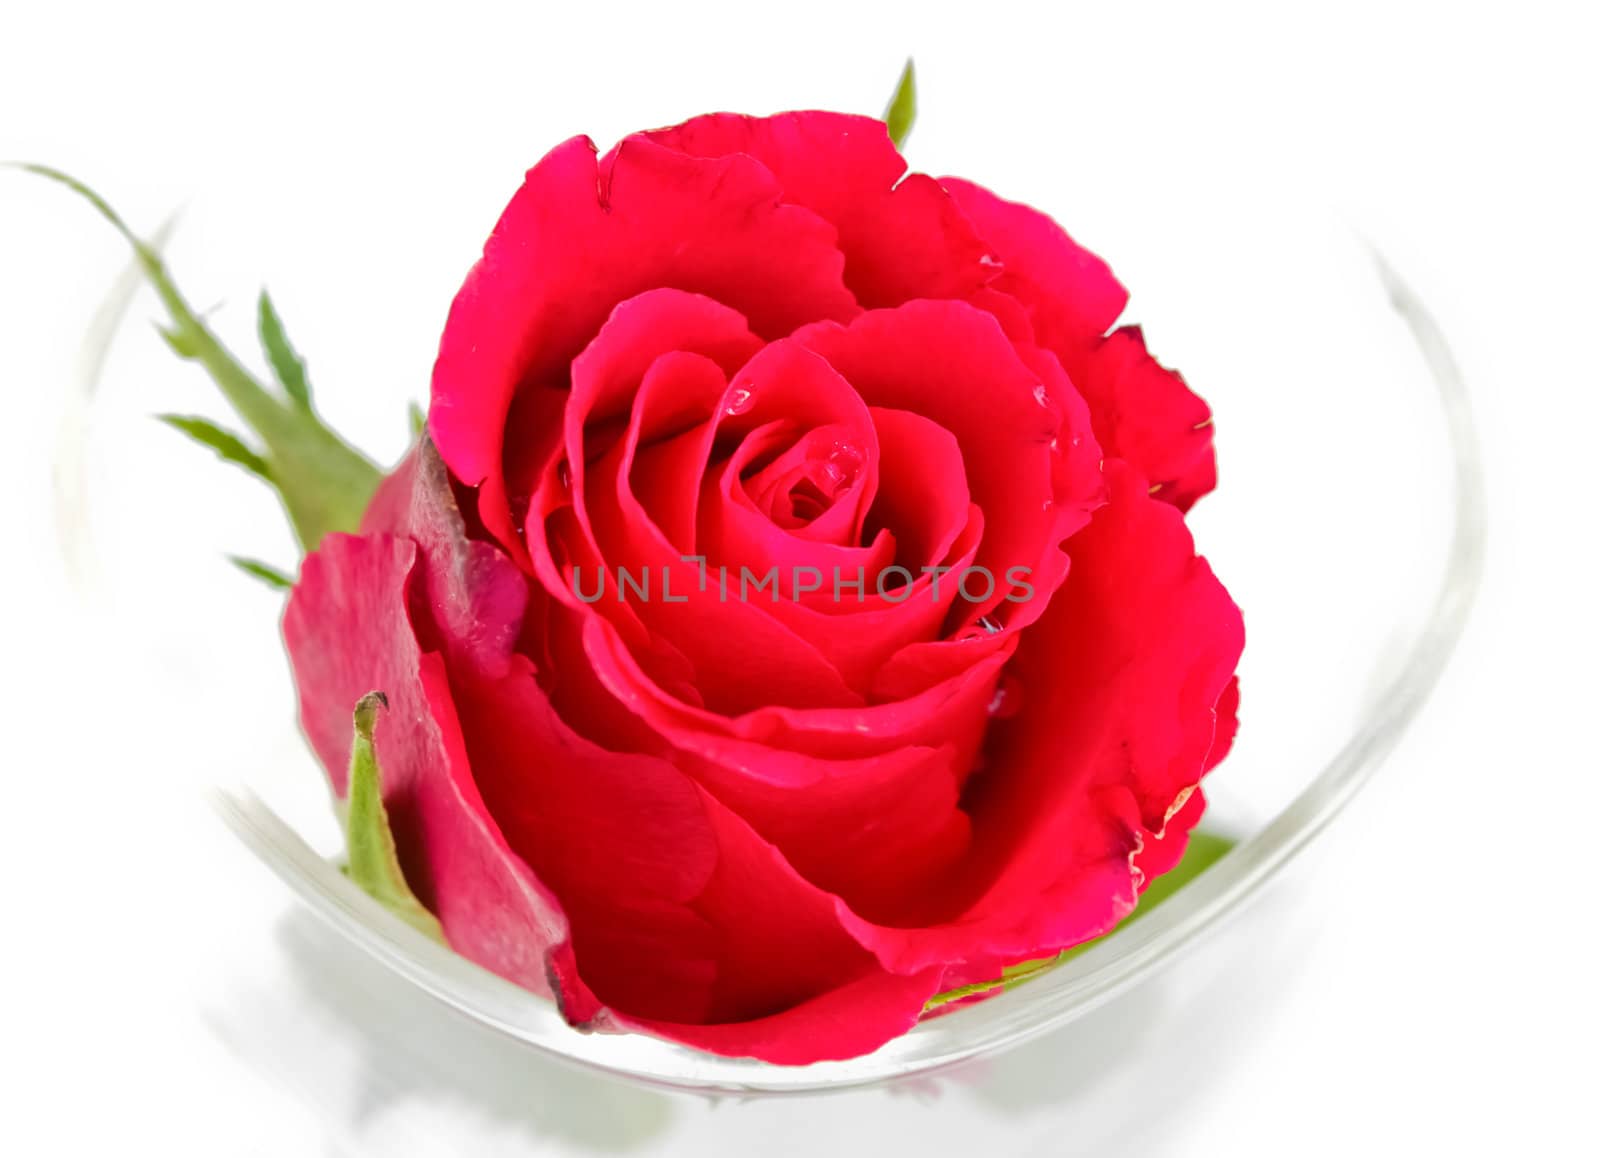 Roses in glass on a white background